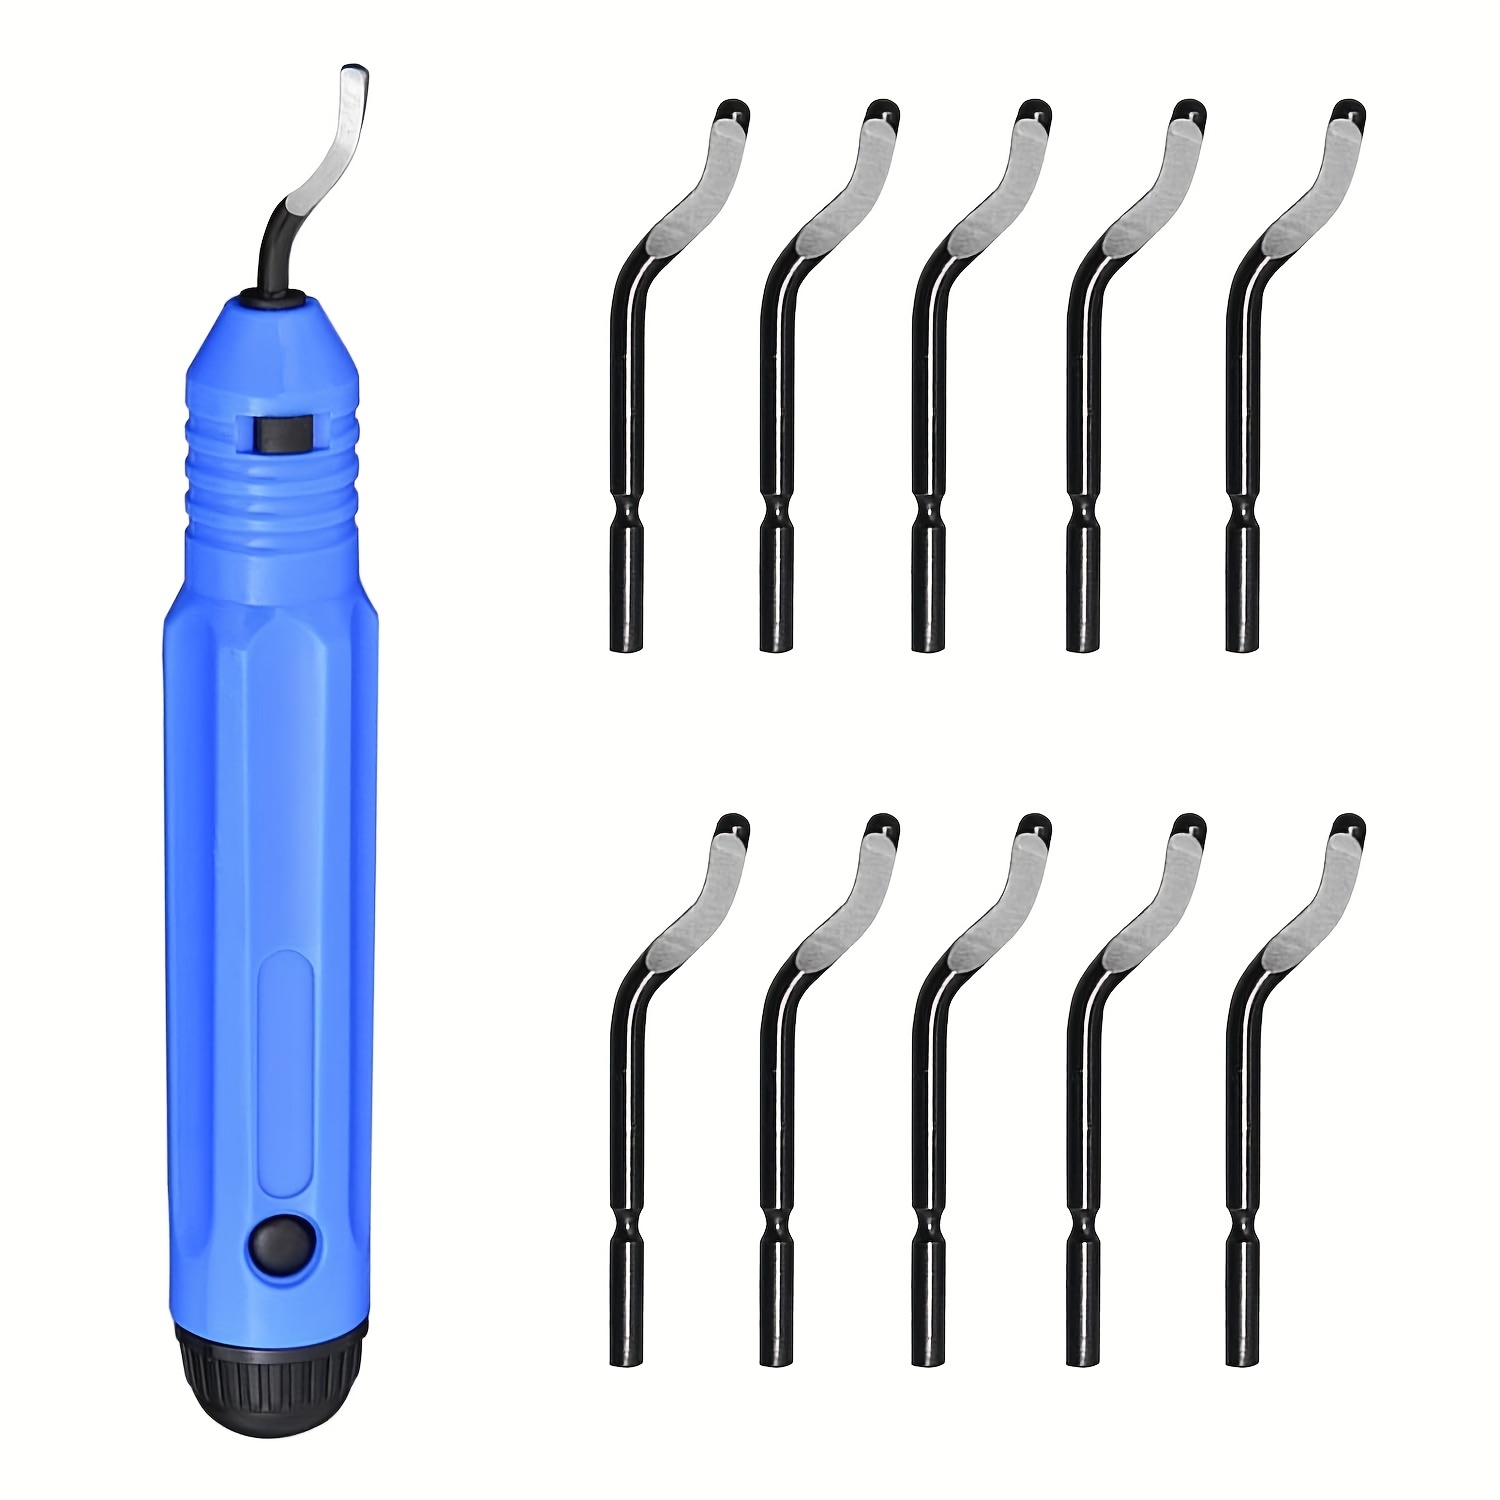 INTORESIN™ Deburring Tool Kit for Resin Crafts（1 tool + 10 blades） –  IntoResin